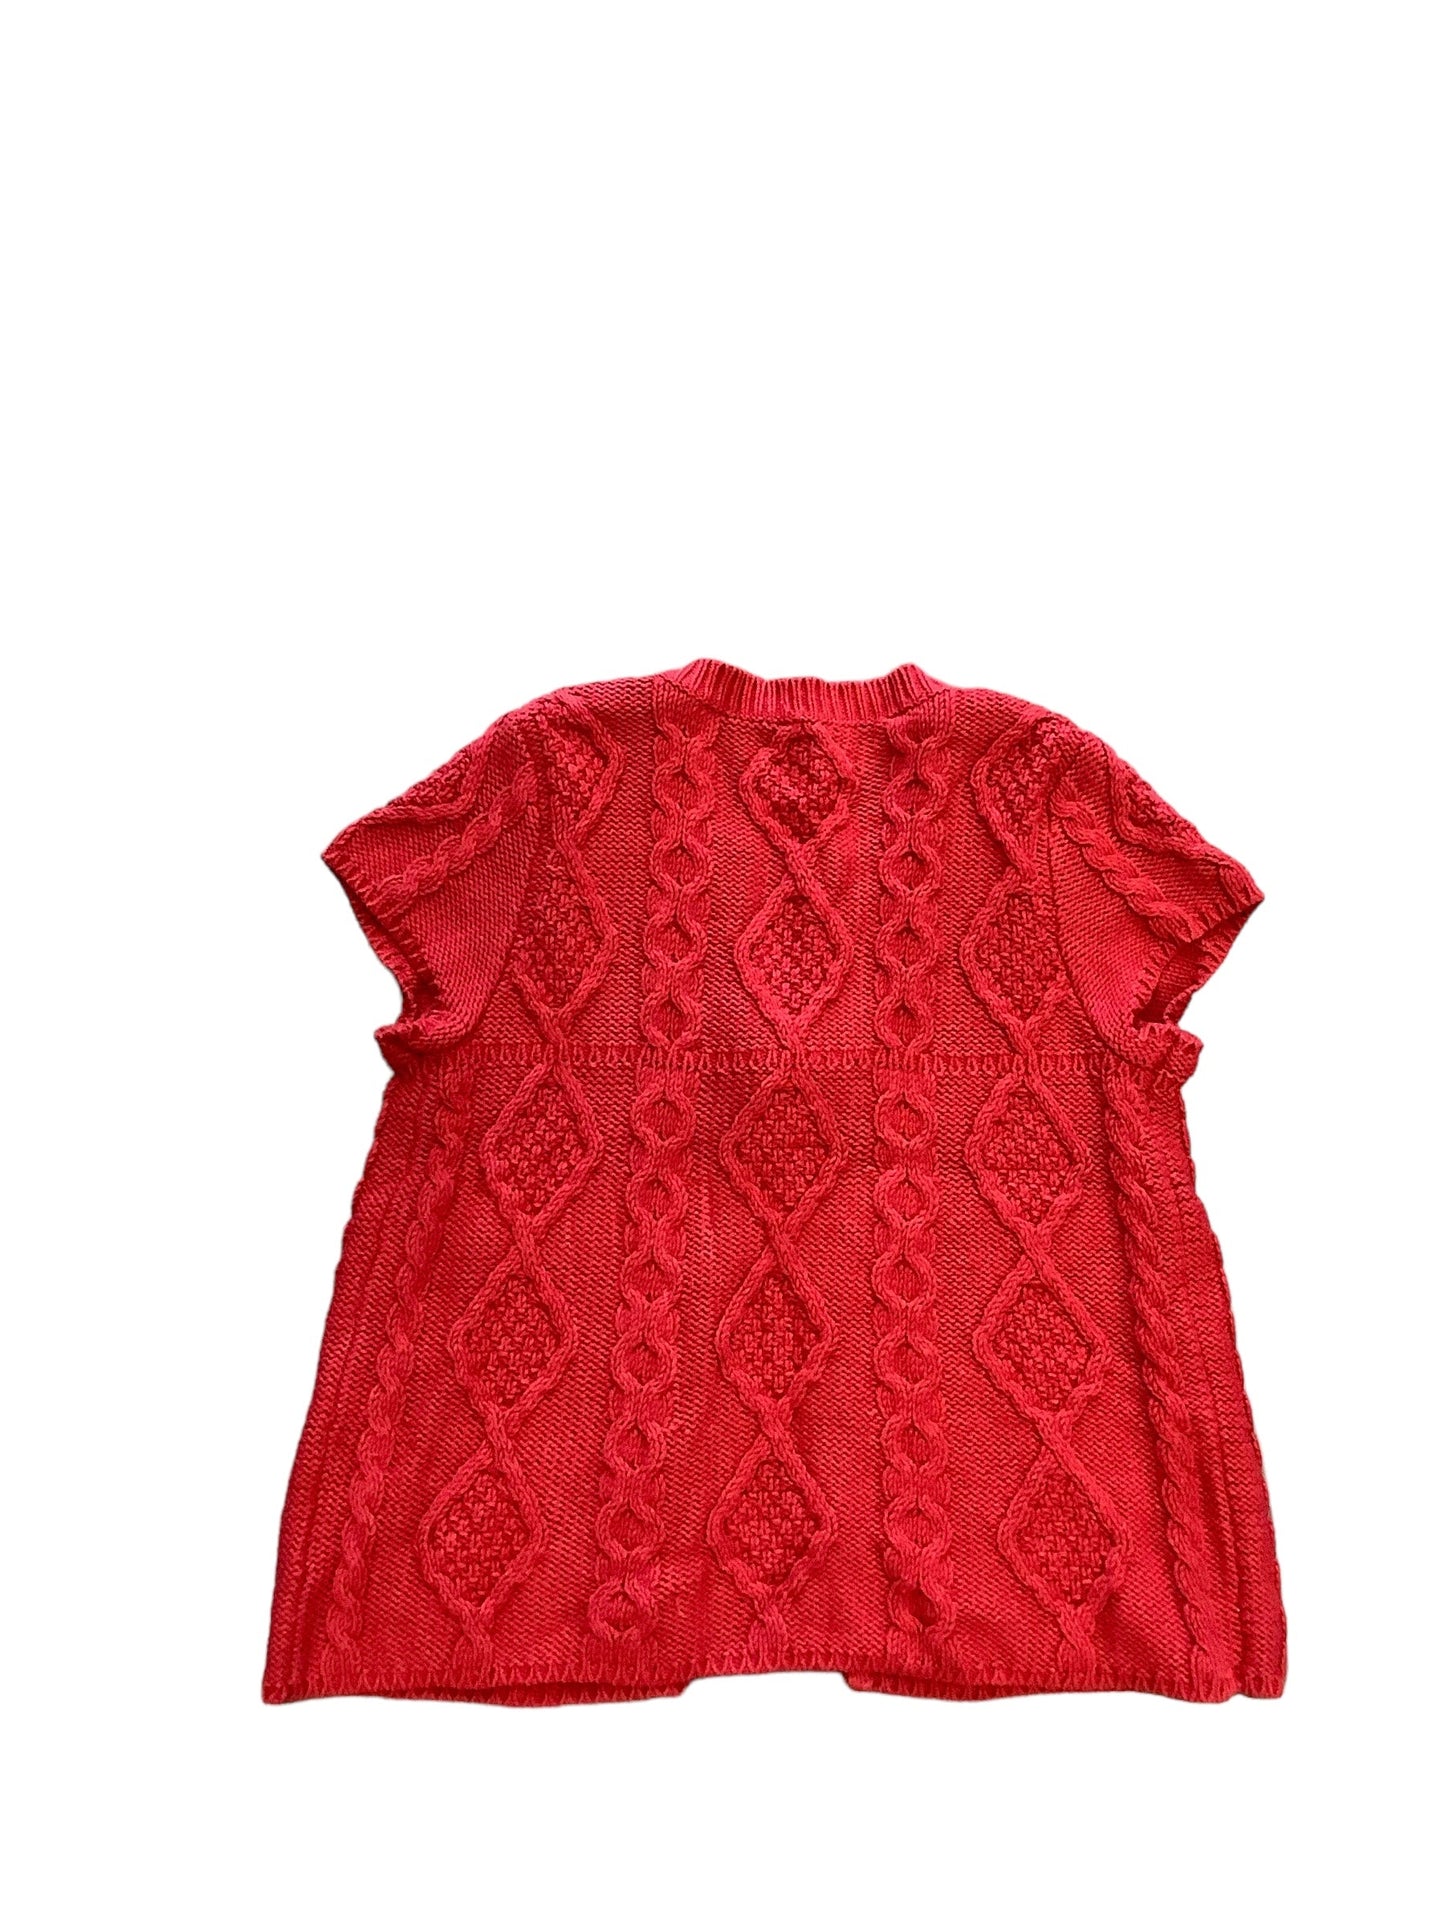 Red Vest Sweater Free People, Size M